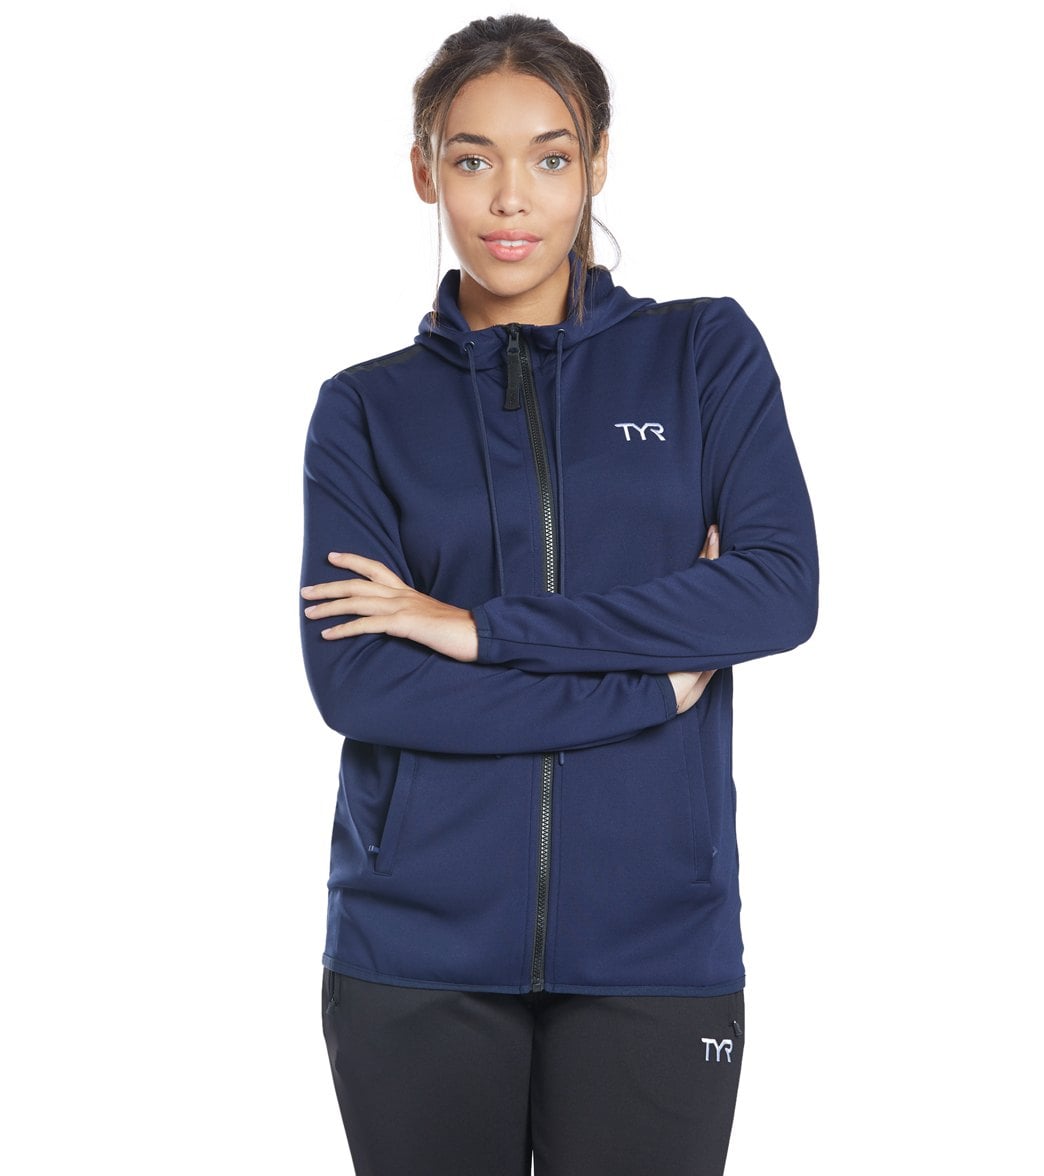 TYR Women's Team Full Zip Hoodie - Navy Large Size Large Polyester - Swimoutlet.com